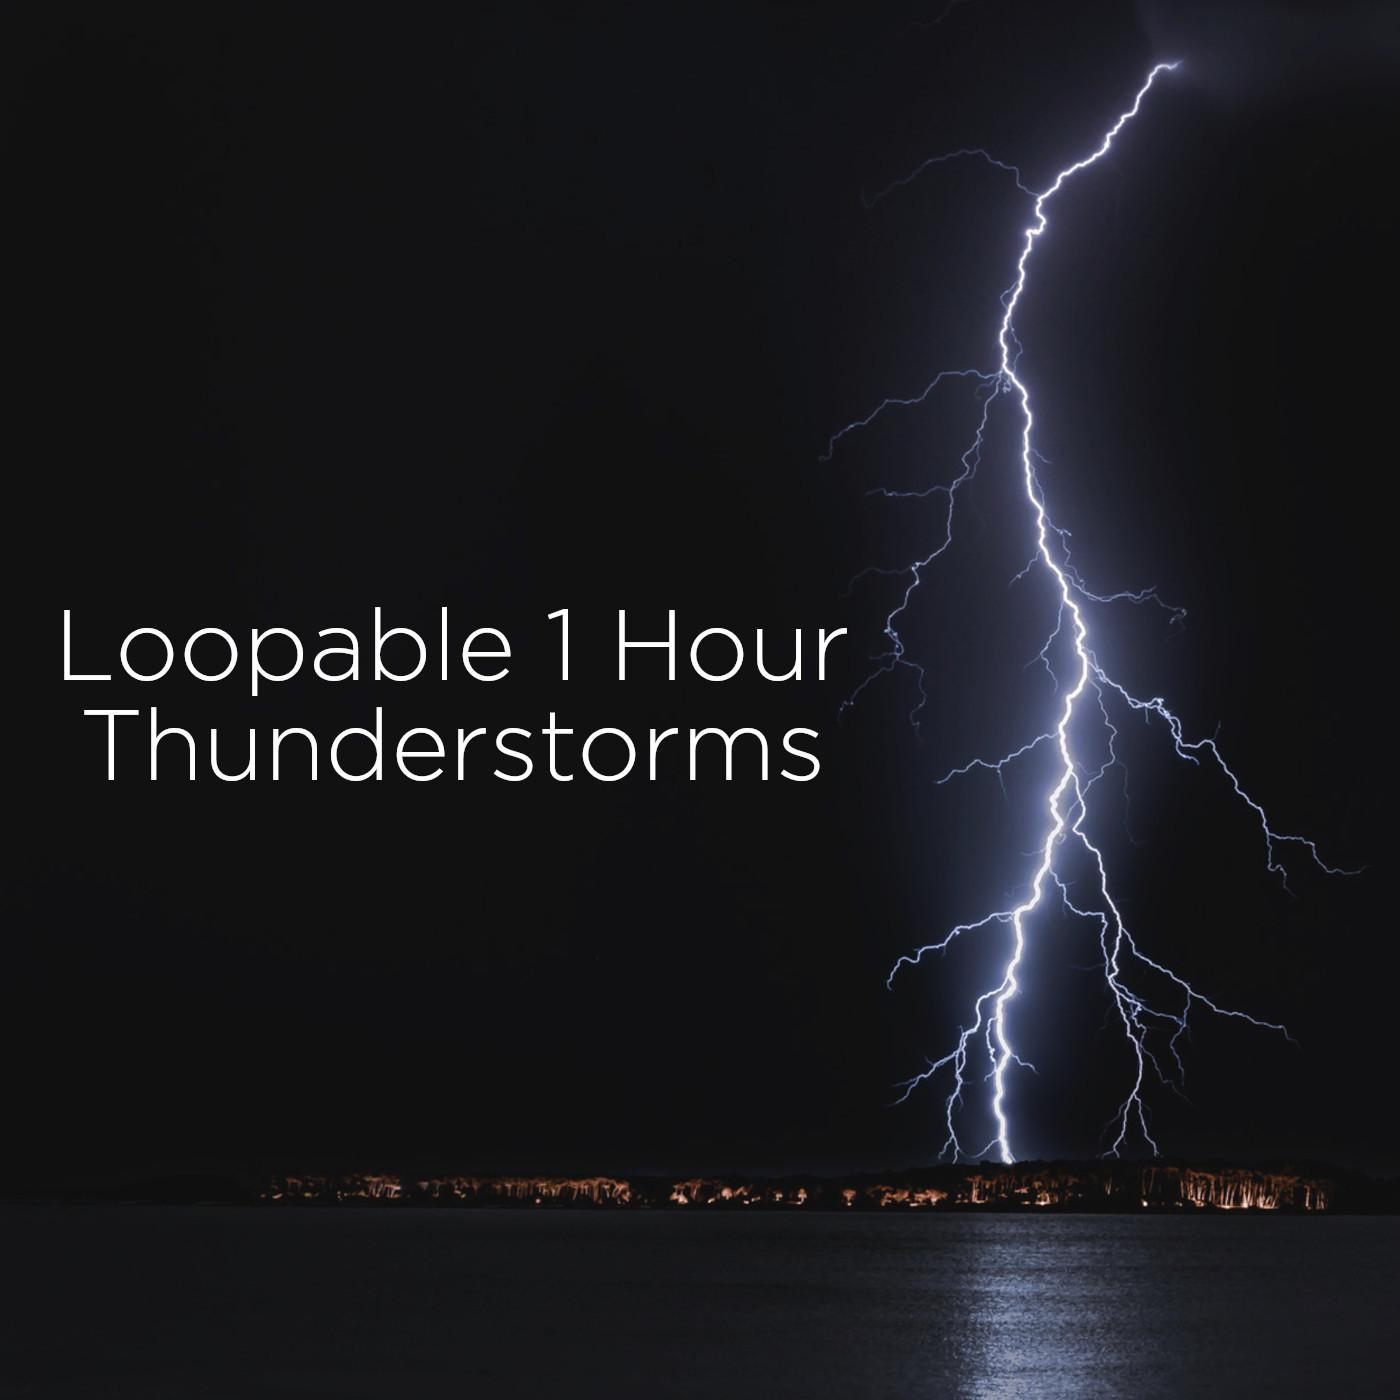 Loopable 1 Hour Thunderstorms